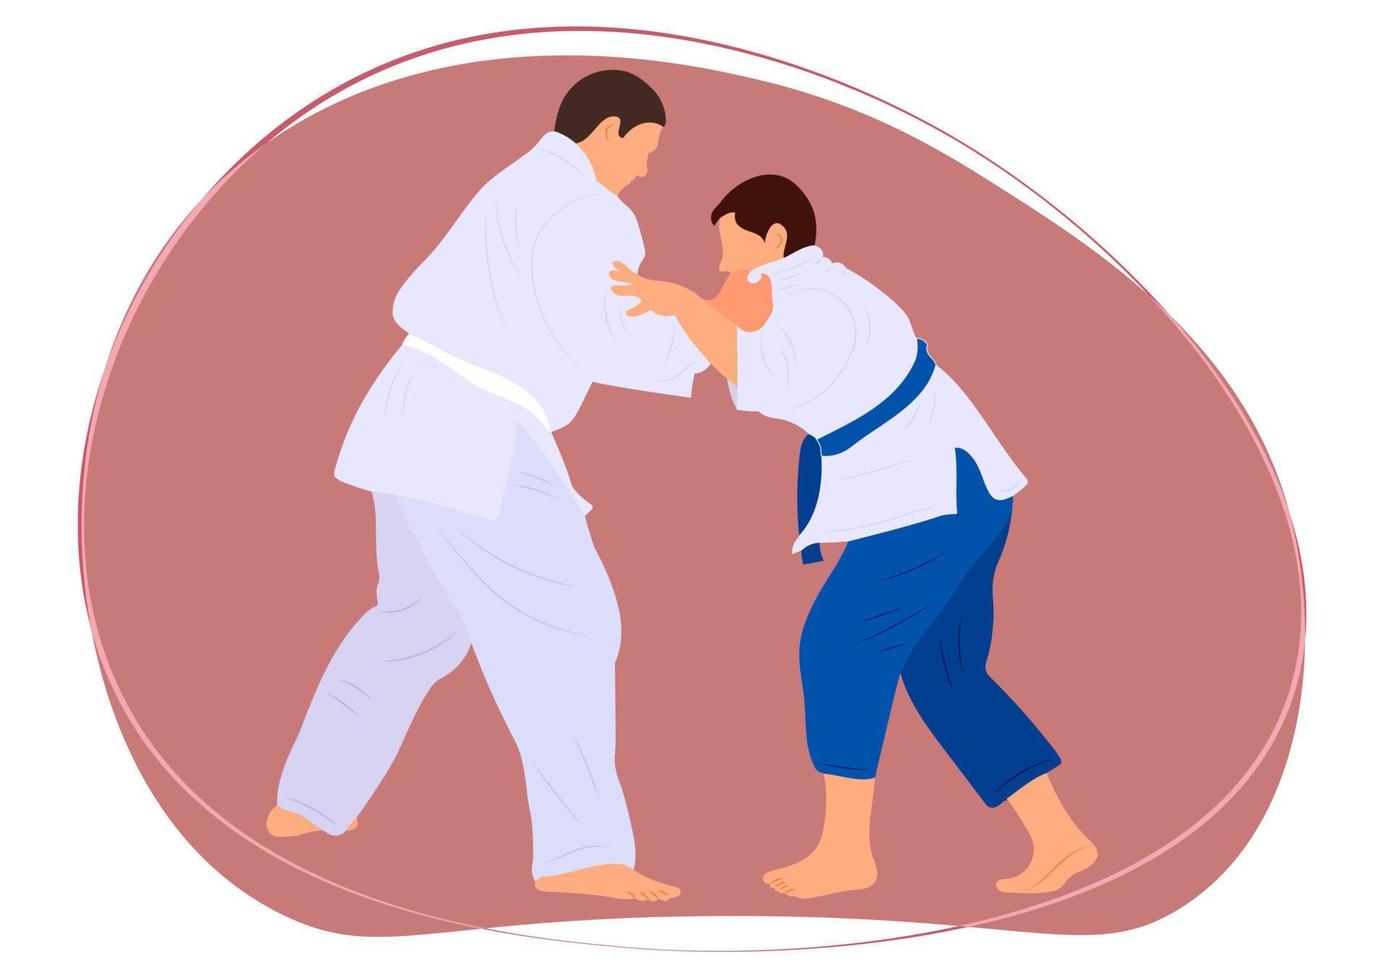 Athlete judoist, fighter in a duel, fight. Judo sport, martial art. Flat style. vector